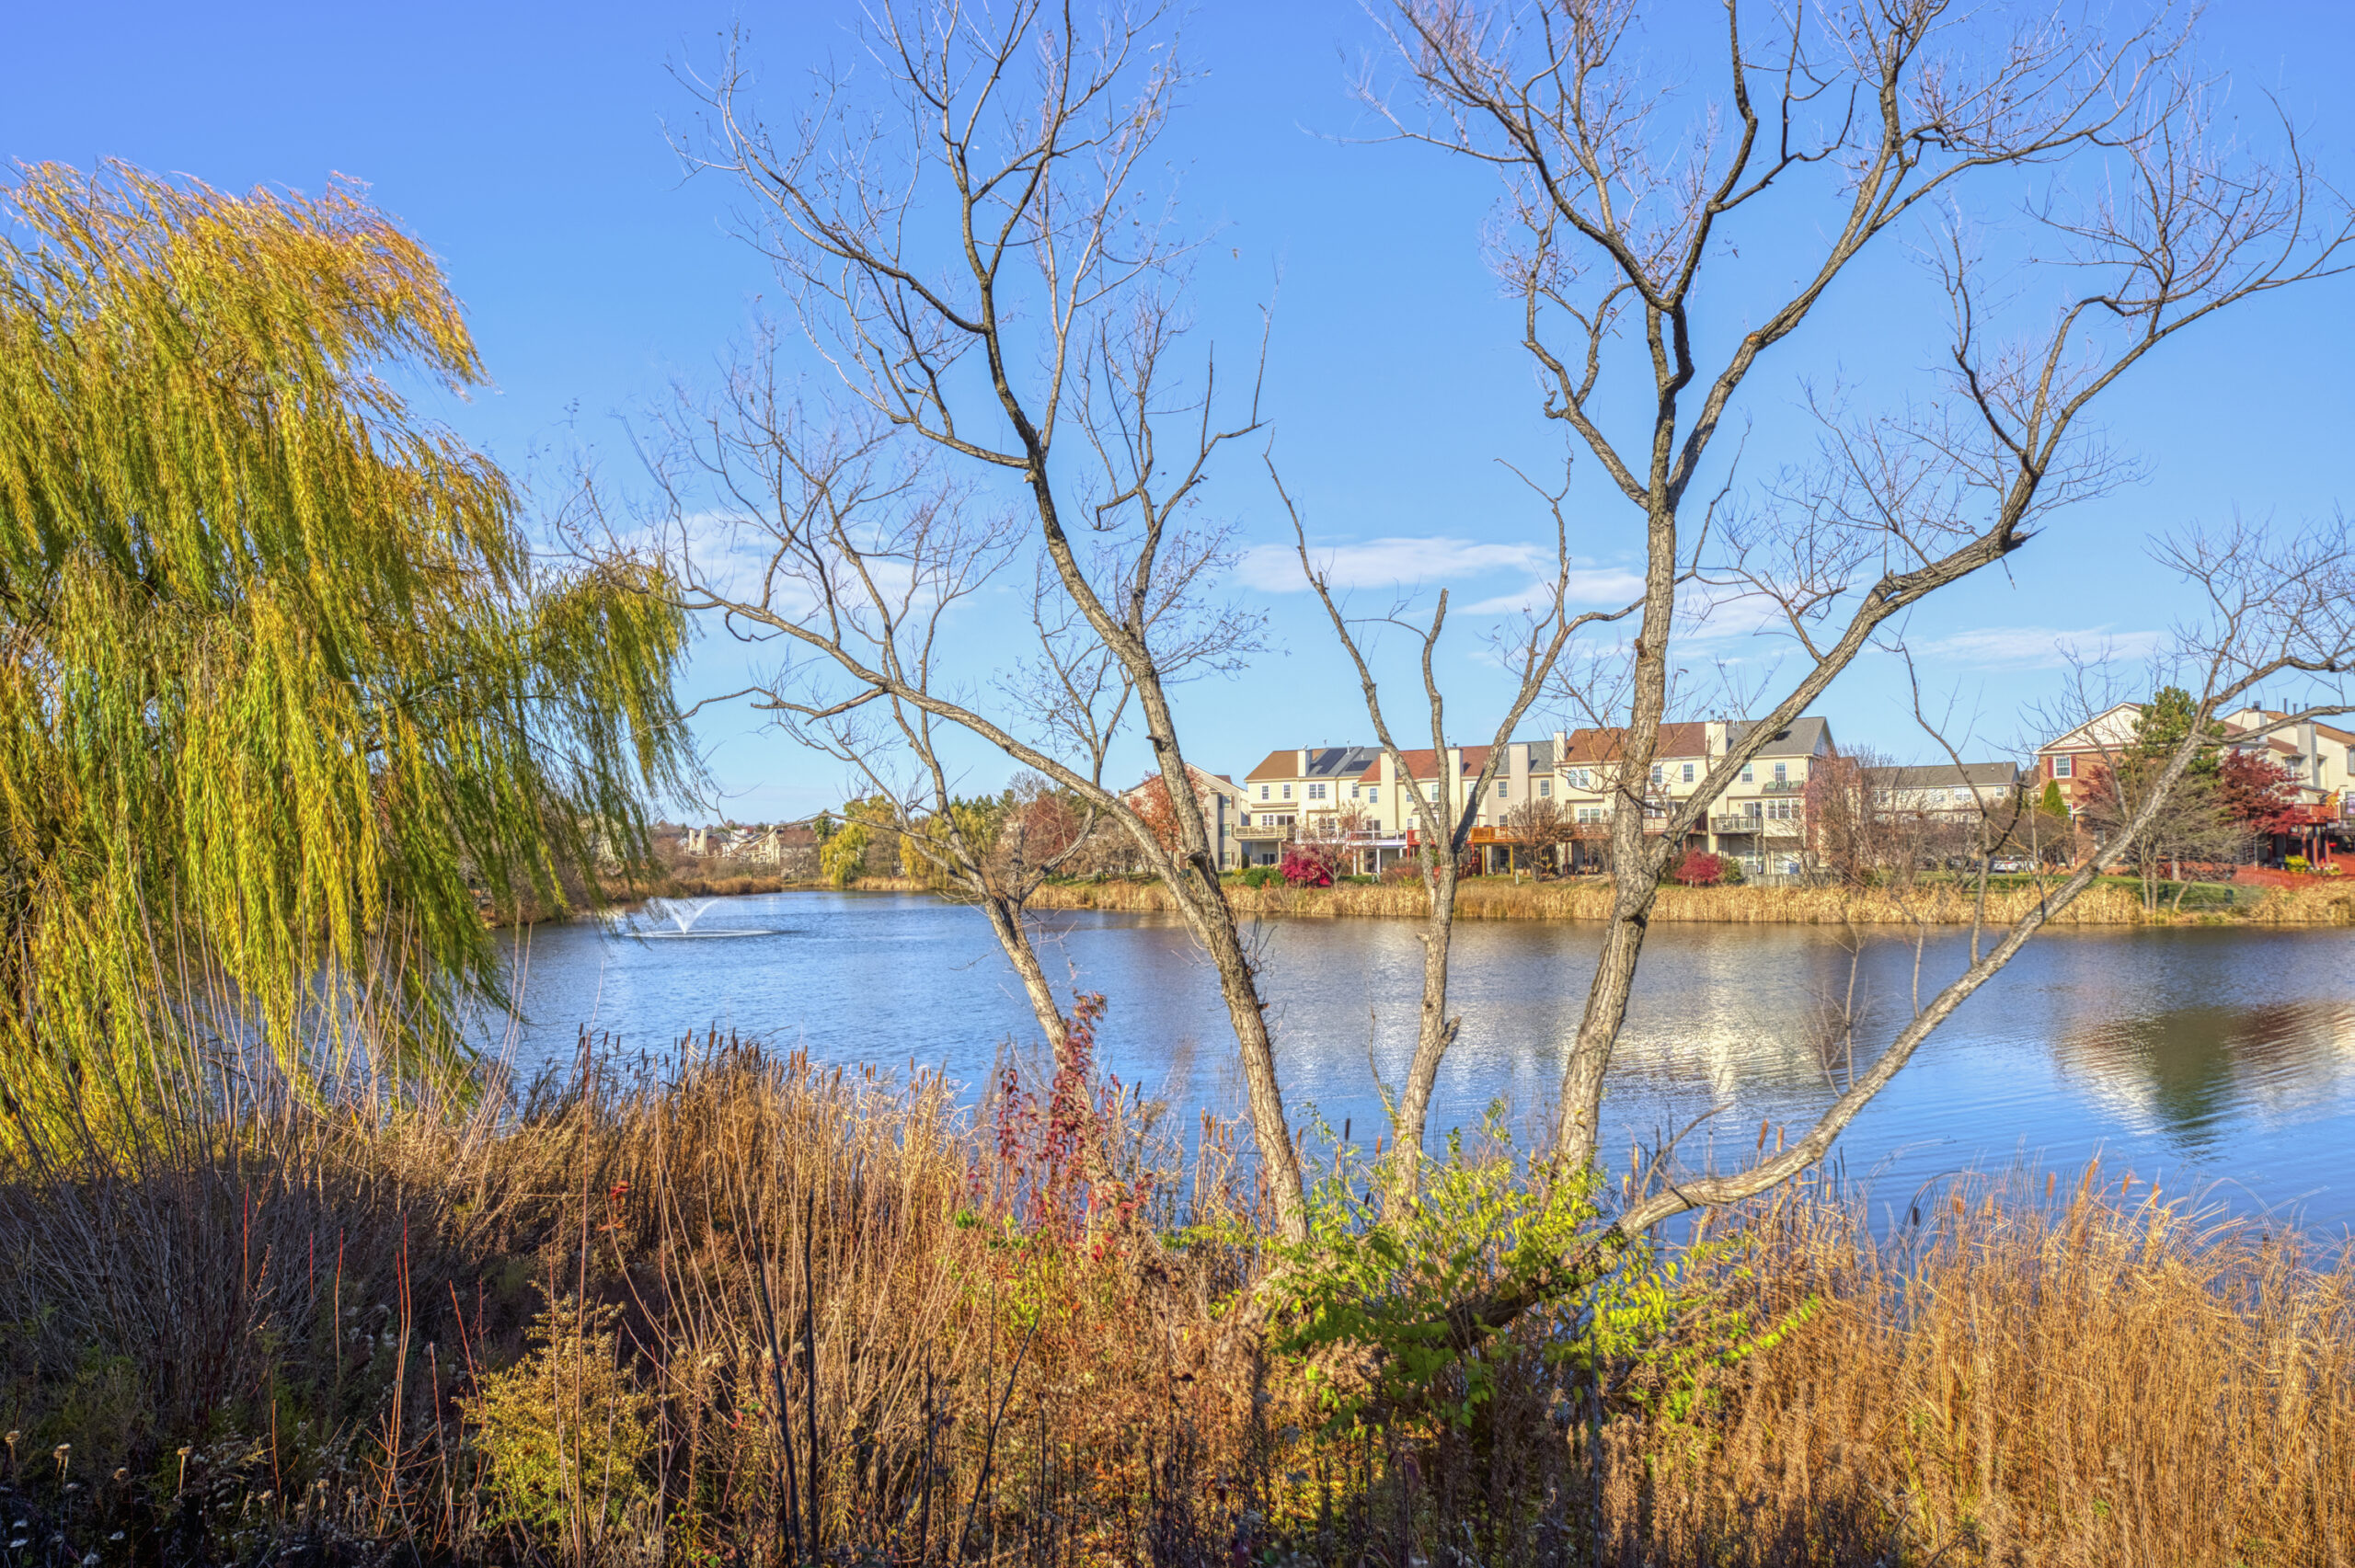 Professional exterior photo of 20588 Cornstalk Ter Unit 101 - Showing the view of the water from the walking path behind the condo building